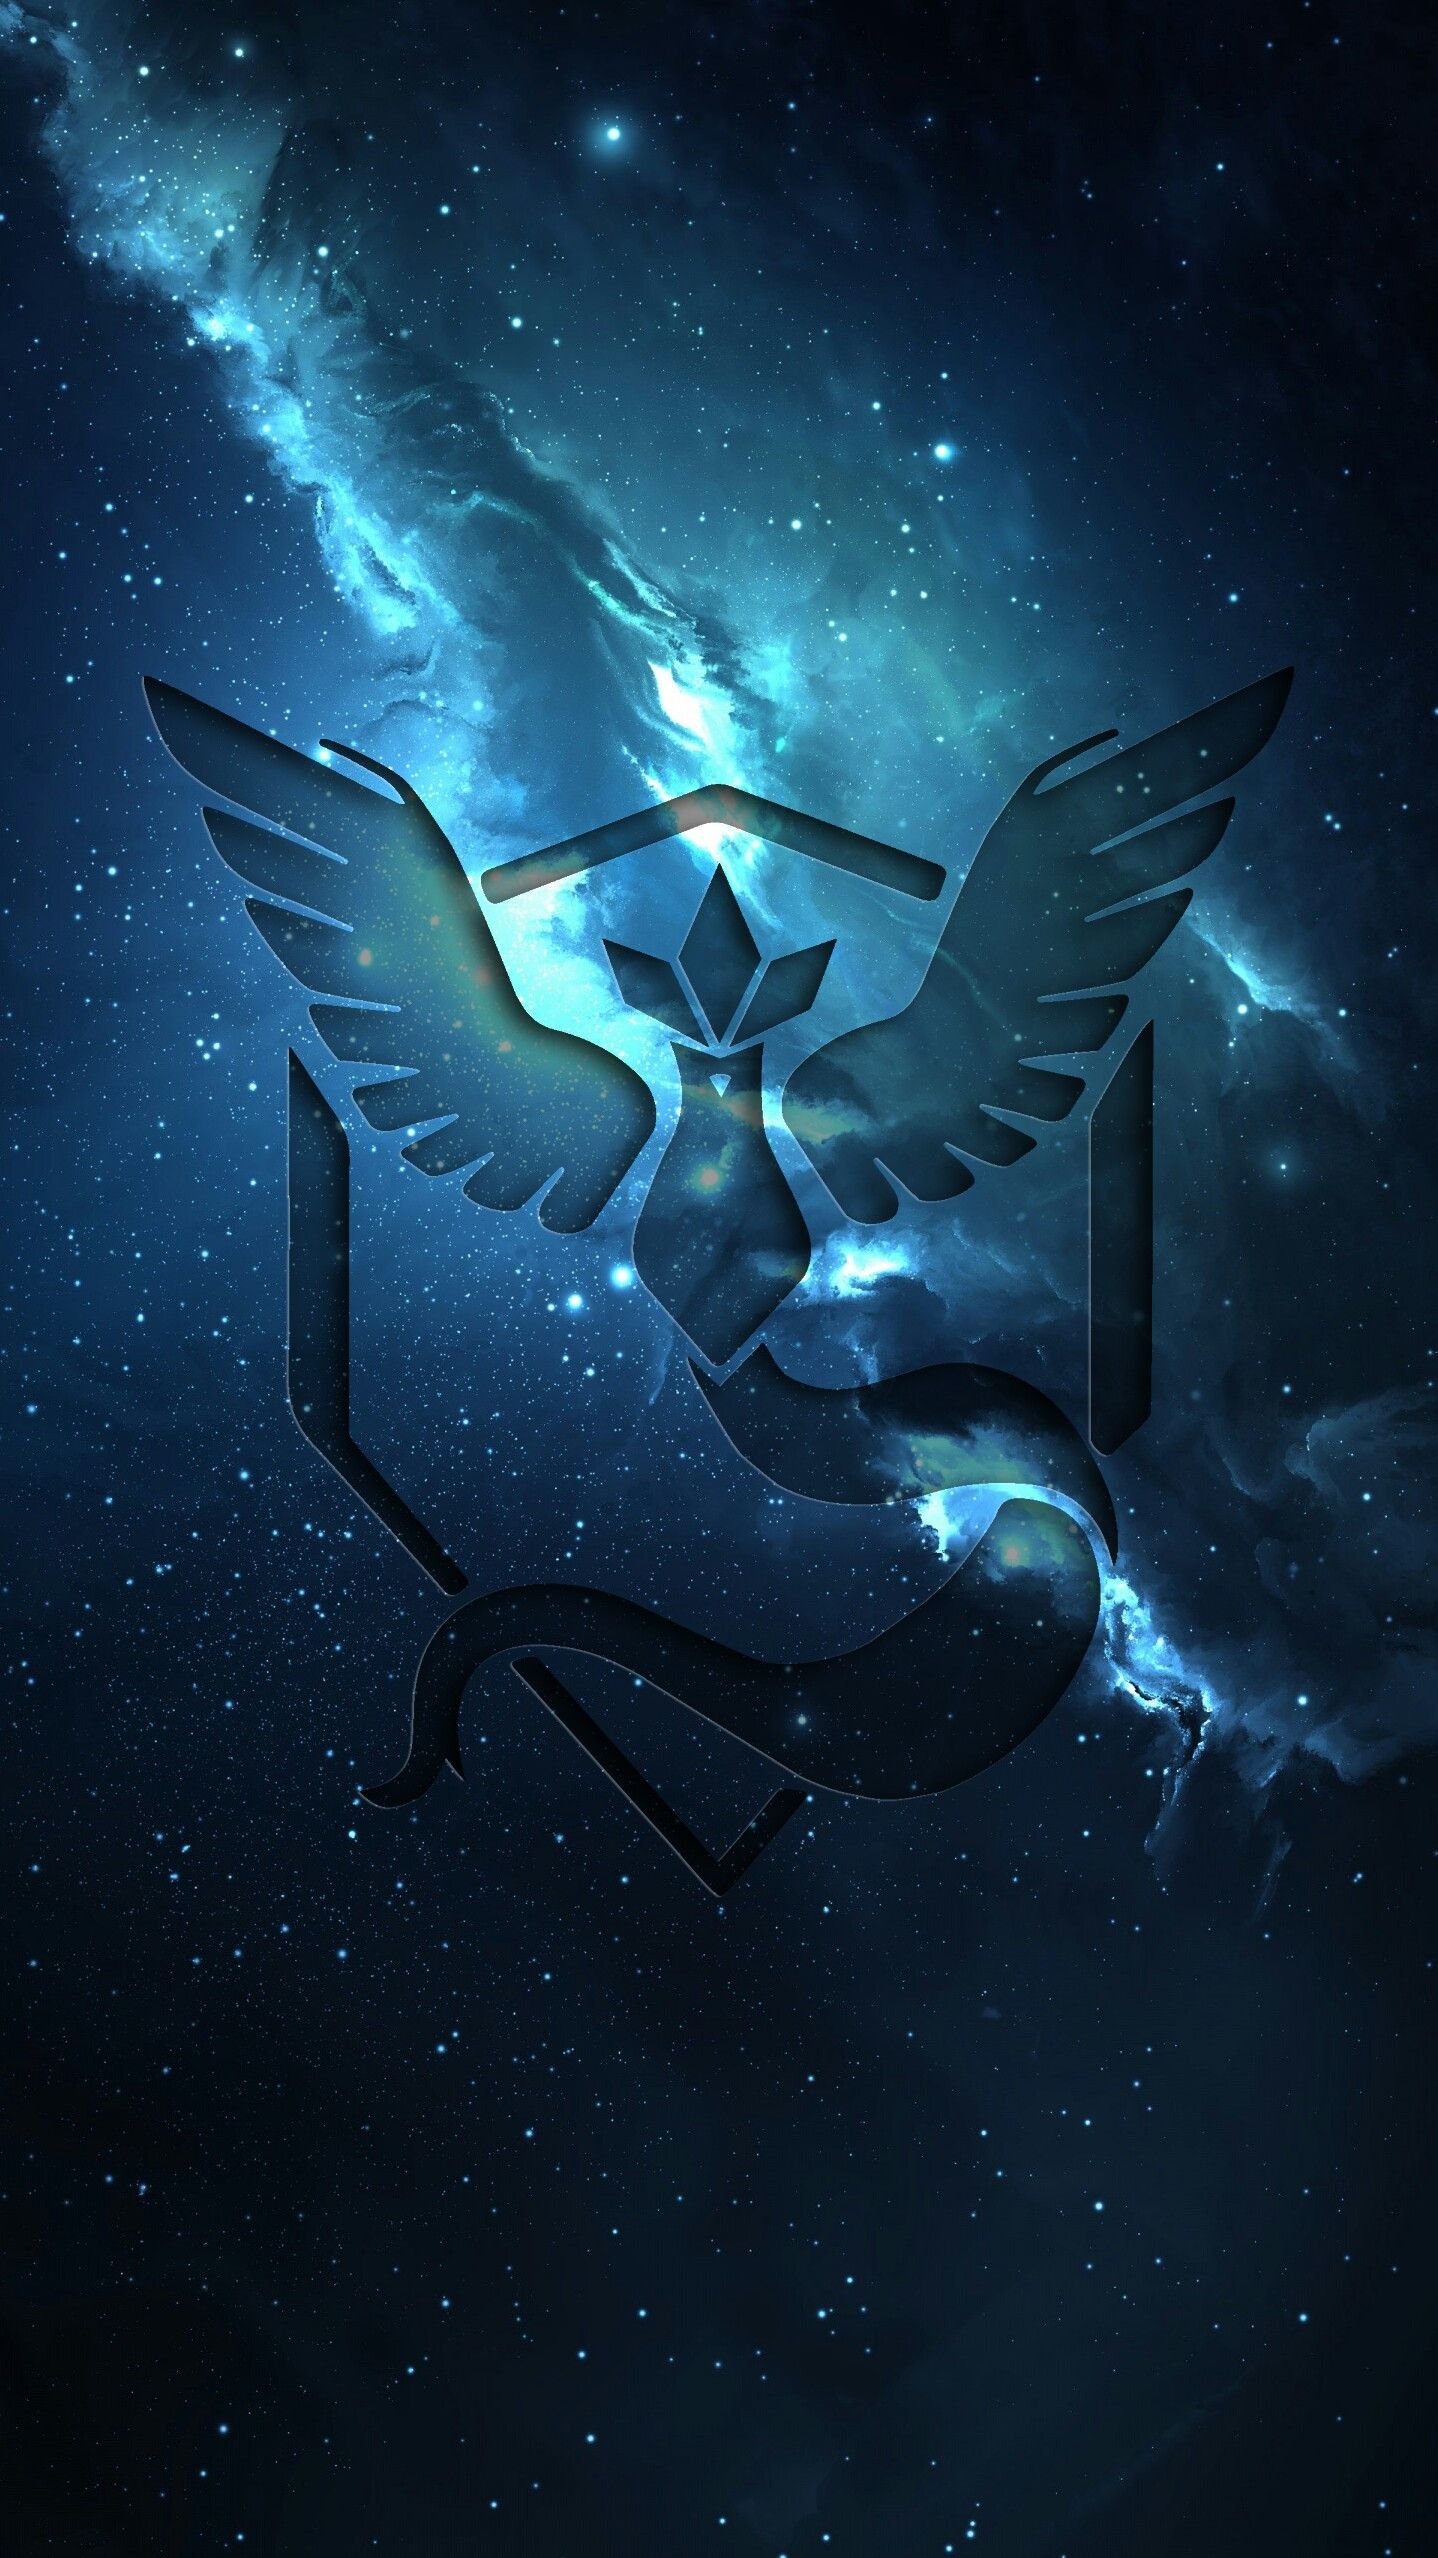 team mystic live wallpaper,darkness,space,illustration,wing,graphics